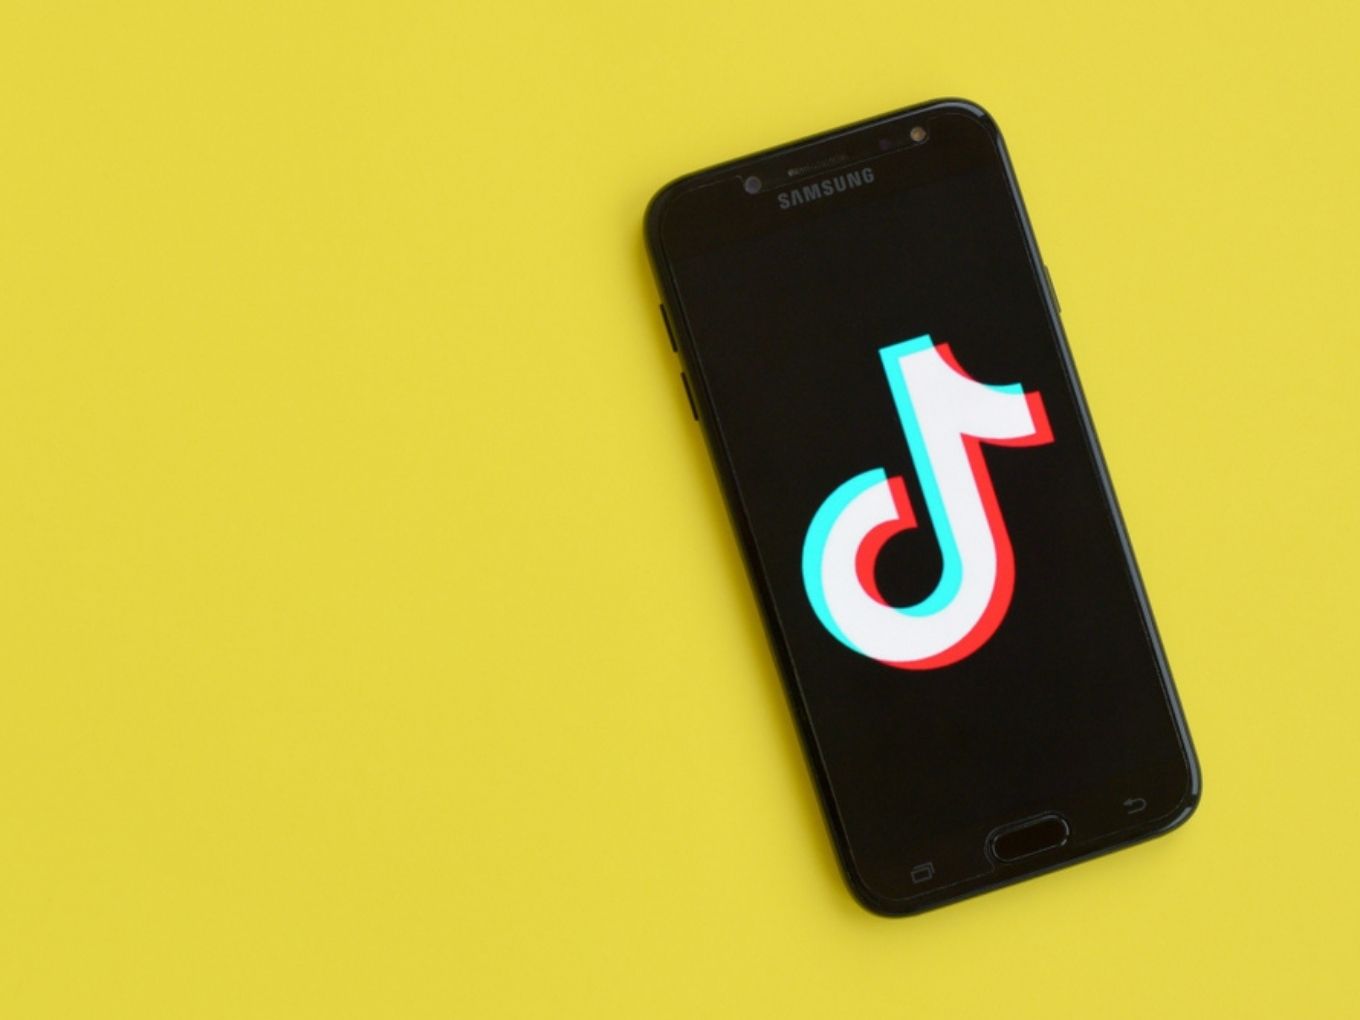 ShareChat Makes The Most Of Chinese App Ban, But TikTok Continues To Lead Indian Market